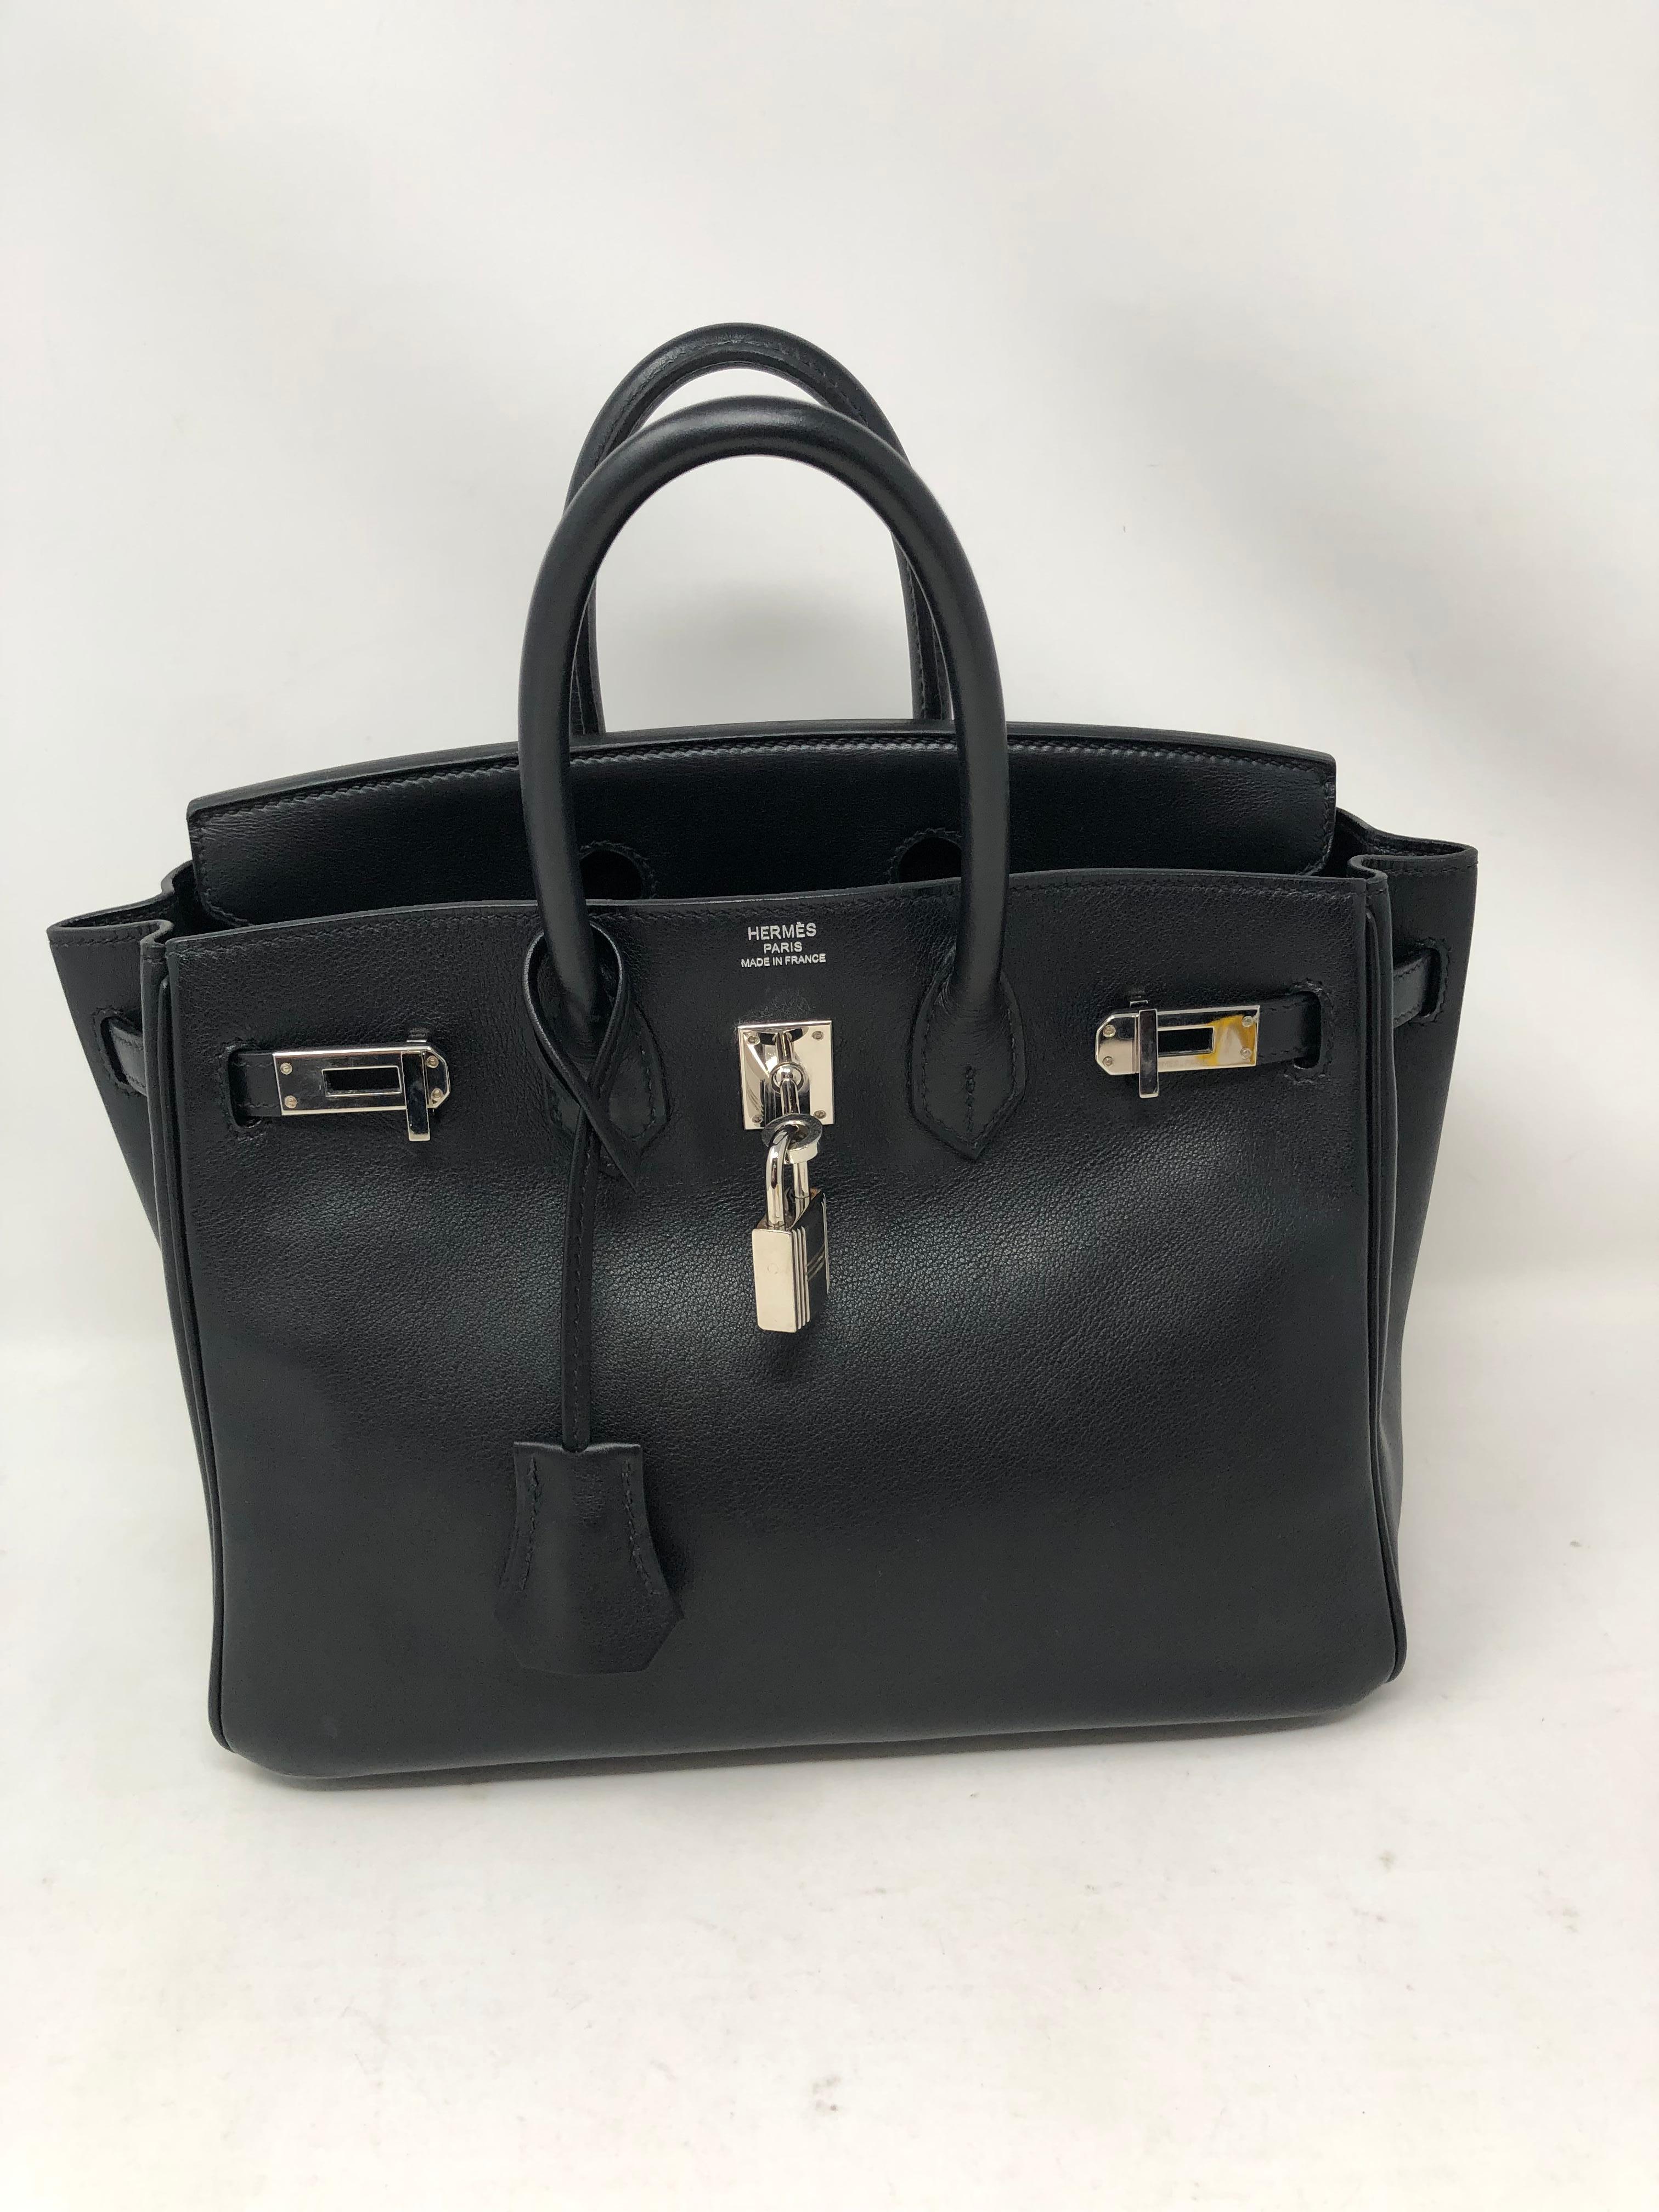 Hermes Birkin 25 Black Swift Leather Bag. Beautiful smooth black leather with palladium hardware. Excellent condition. Just received a spa treatment at Hermes. Looks new. The most wanted bag. Collector's piece. Iconic and rare unicorn bag.